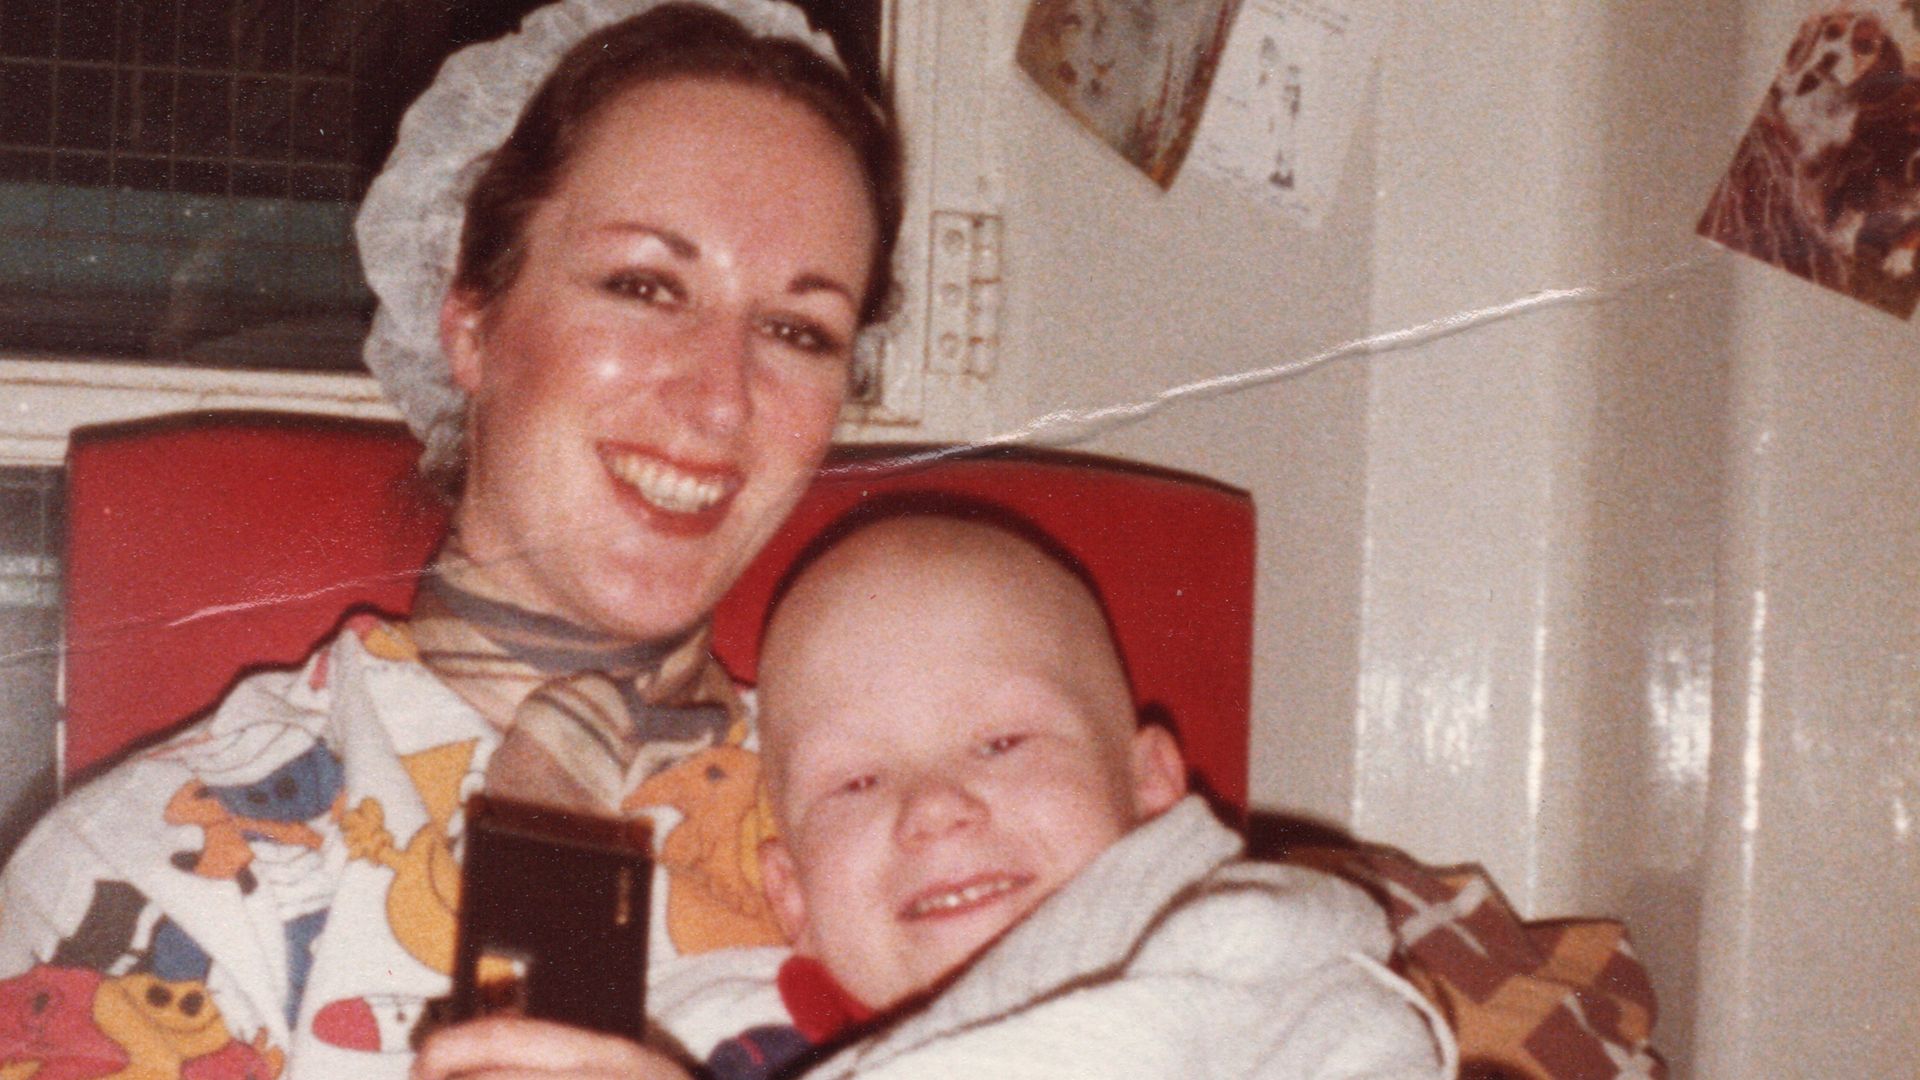 Mother says she gave terminally ill son 'quiet end' with morphine - as police 'making enquiries'